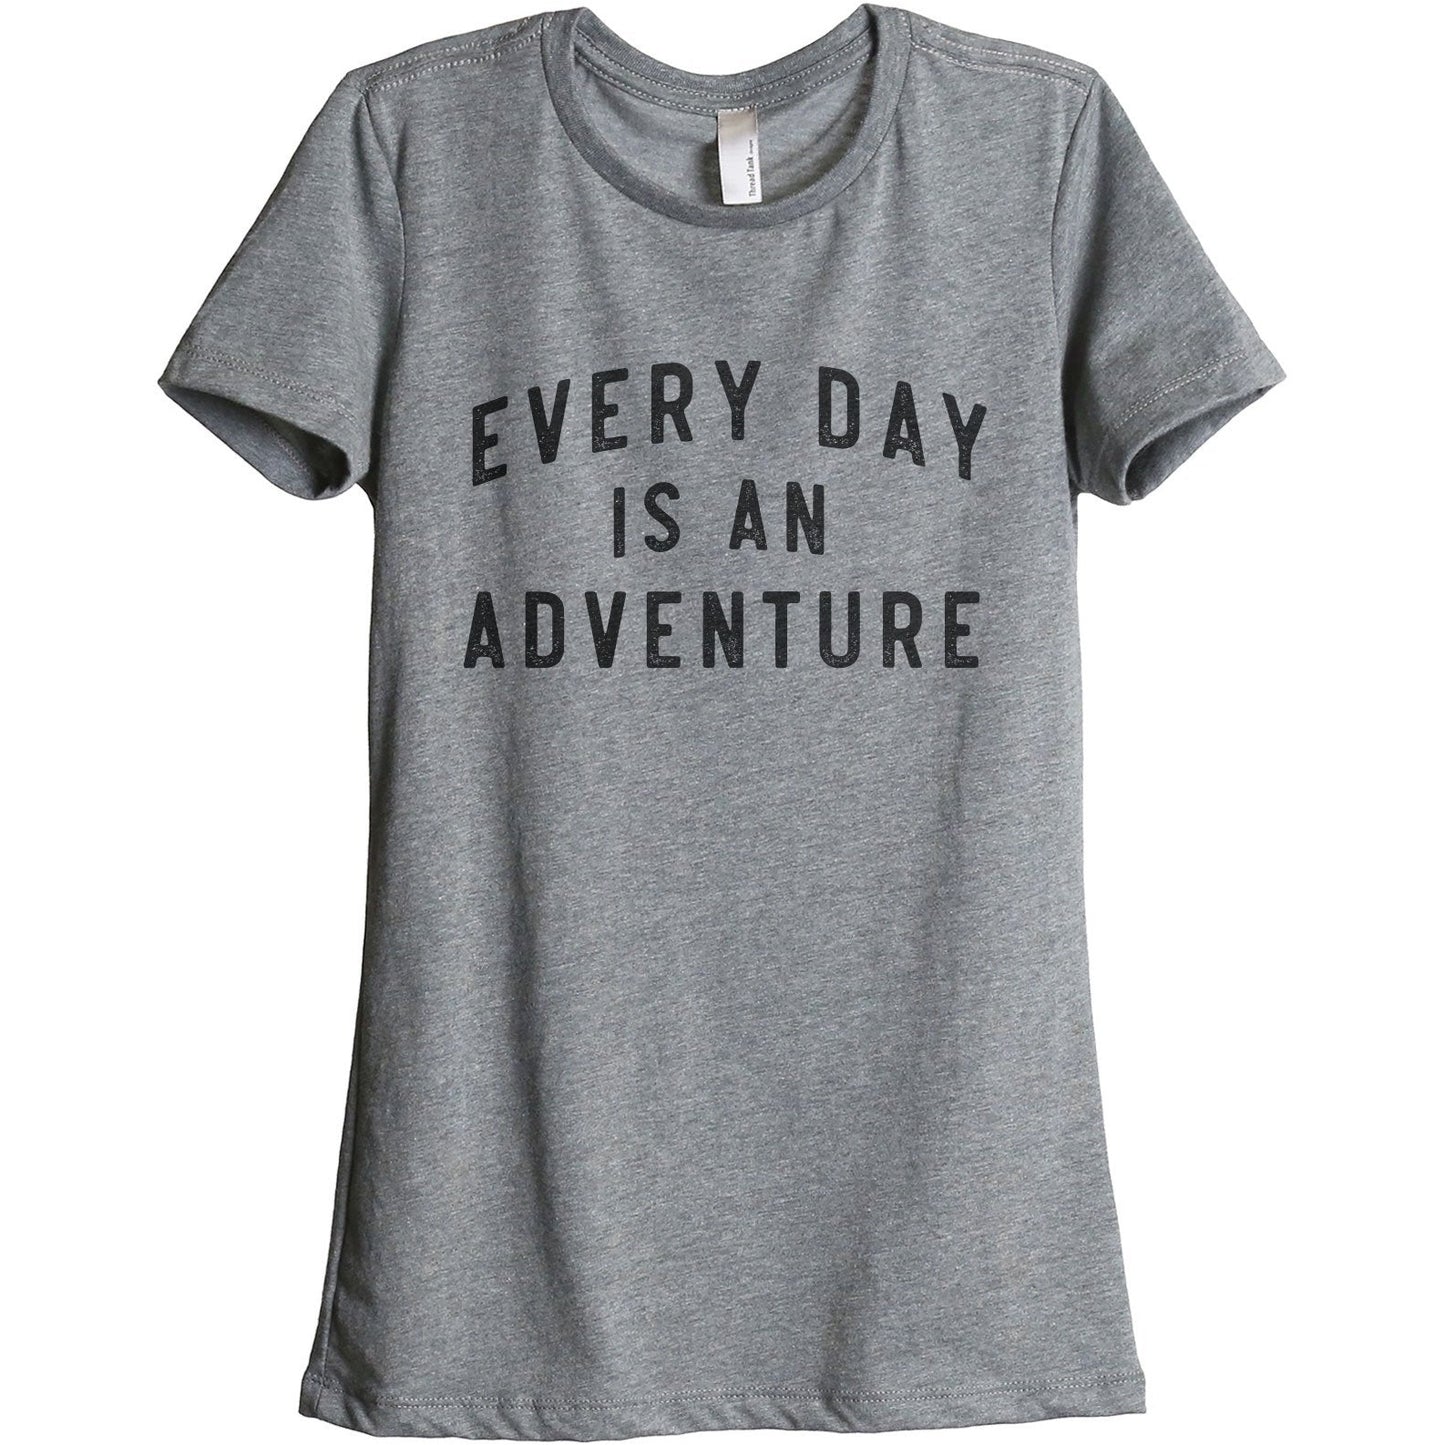 Everyday Is An Adventure Women's Relaxed Crewneck T-Shirt Top Tee Heather Grey